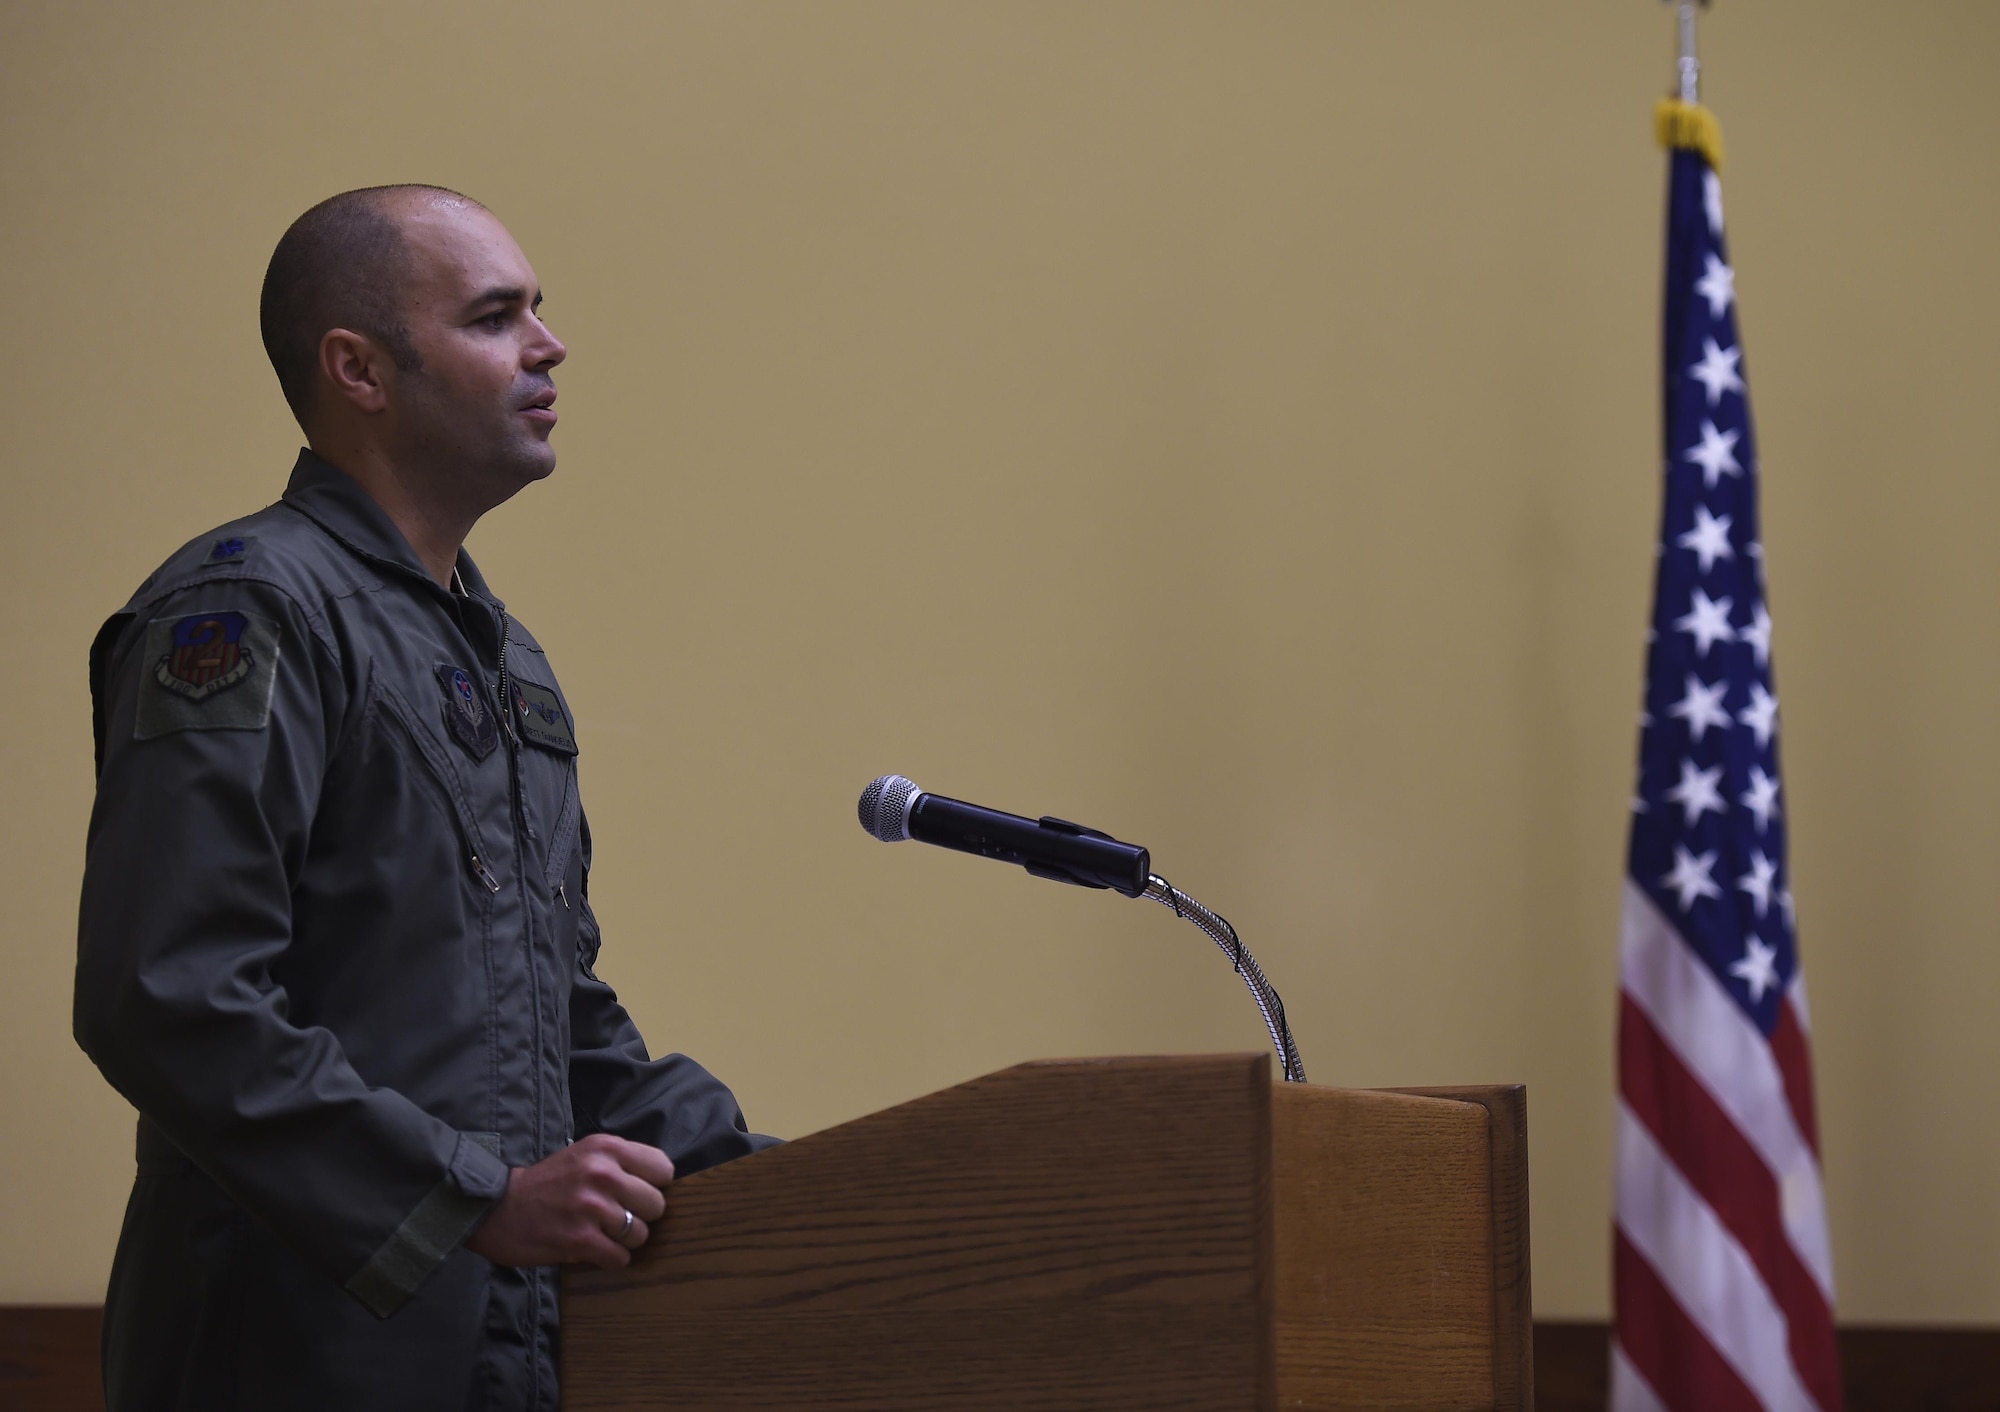 Lt. Col. Bret DeAngelis, Detachment 2 commander, speaks during the 1st Special Operations Group Detachment 2 activation ceremony at Hurlburt Field, Fla., July 10, 2015. DET 2 was activated to operationally test the AC-130J Ghostrider gunship, train aircrews, as well as develop new tactics, techniques and procedures for the aircraft. (U.S. Air Force photos by Airman Kai White/Released)